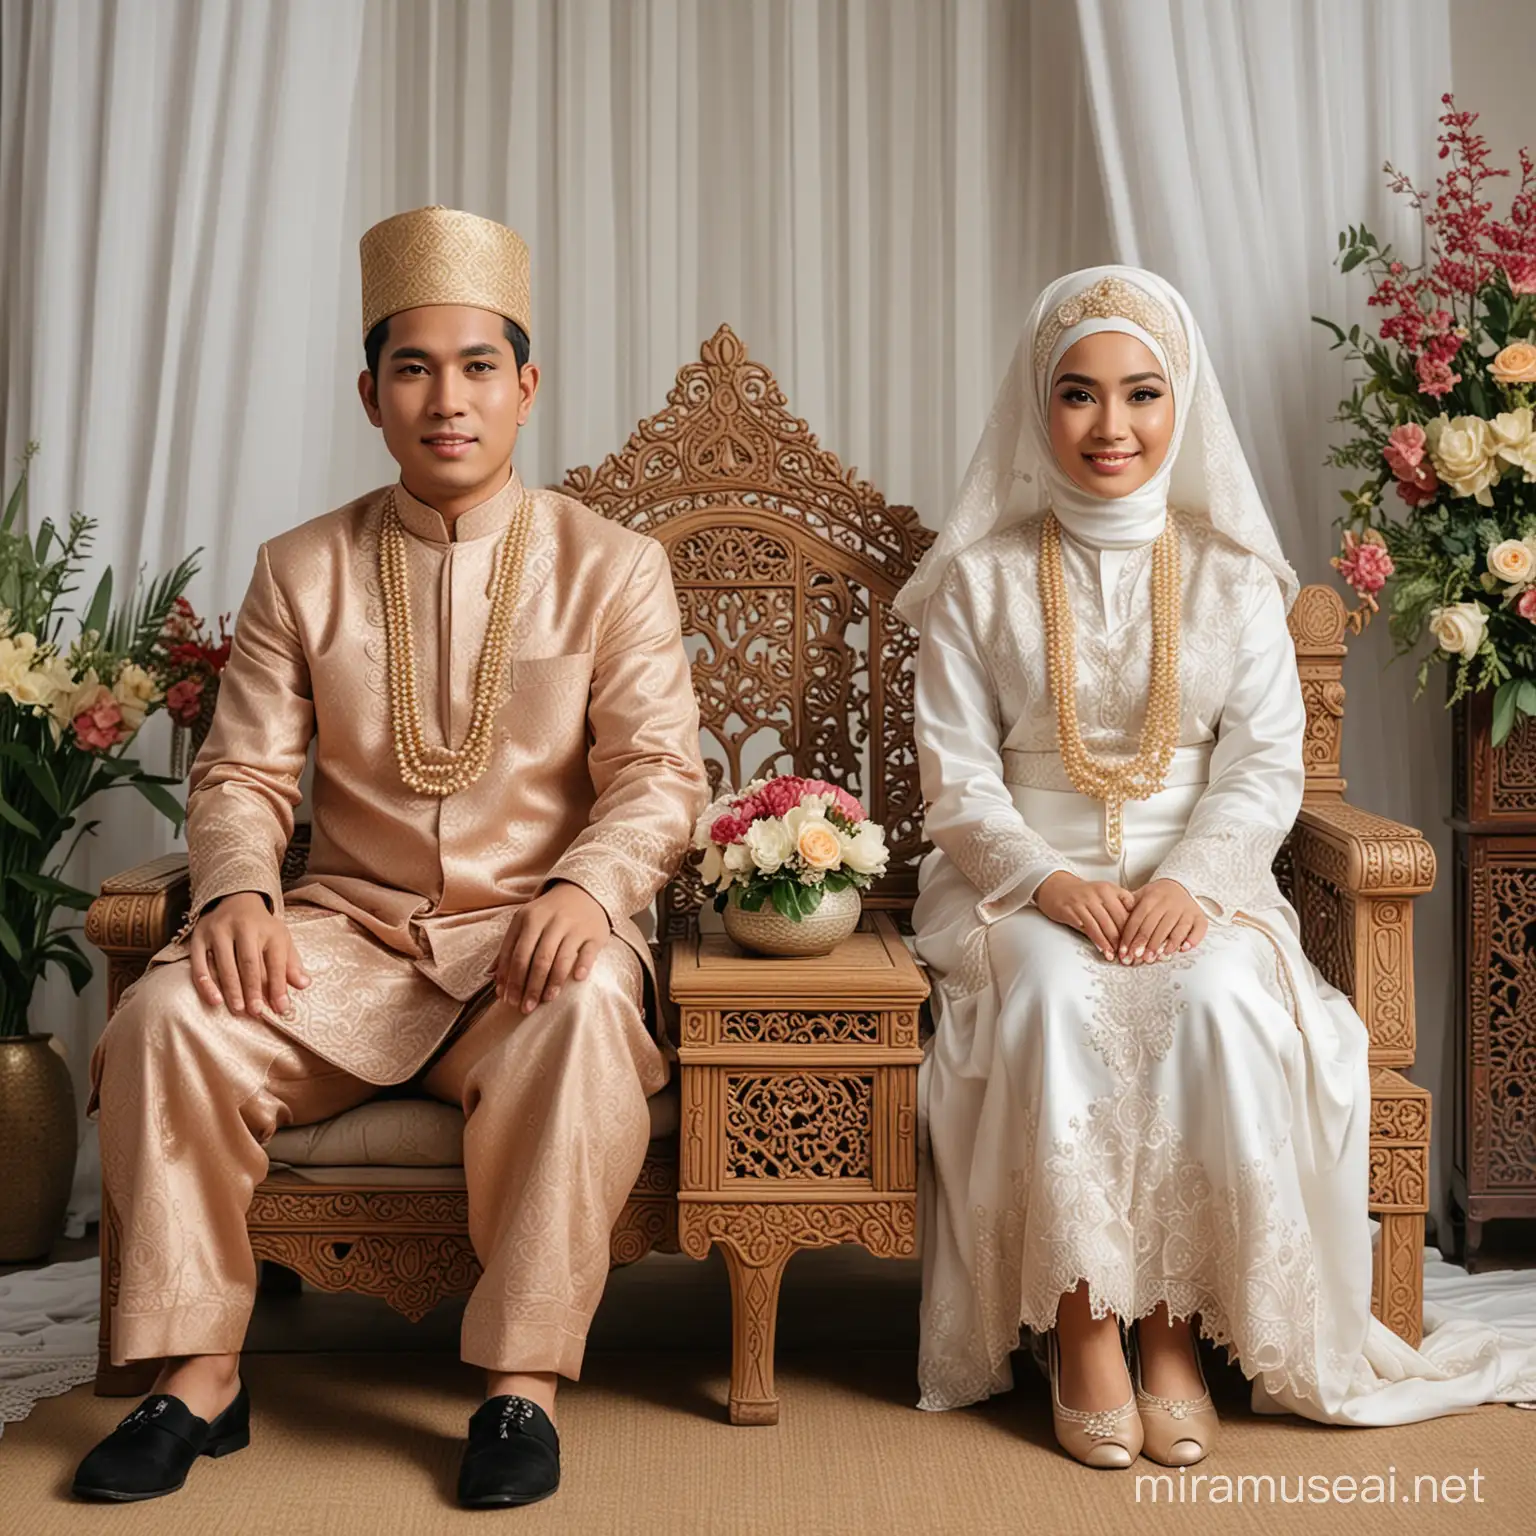 Traditional Javanese Wedding Male and Female Brides in Hijab